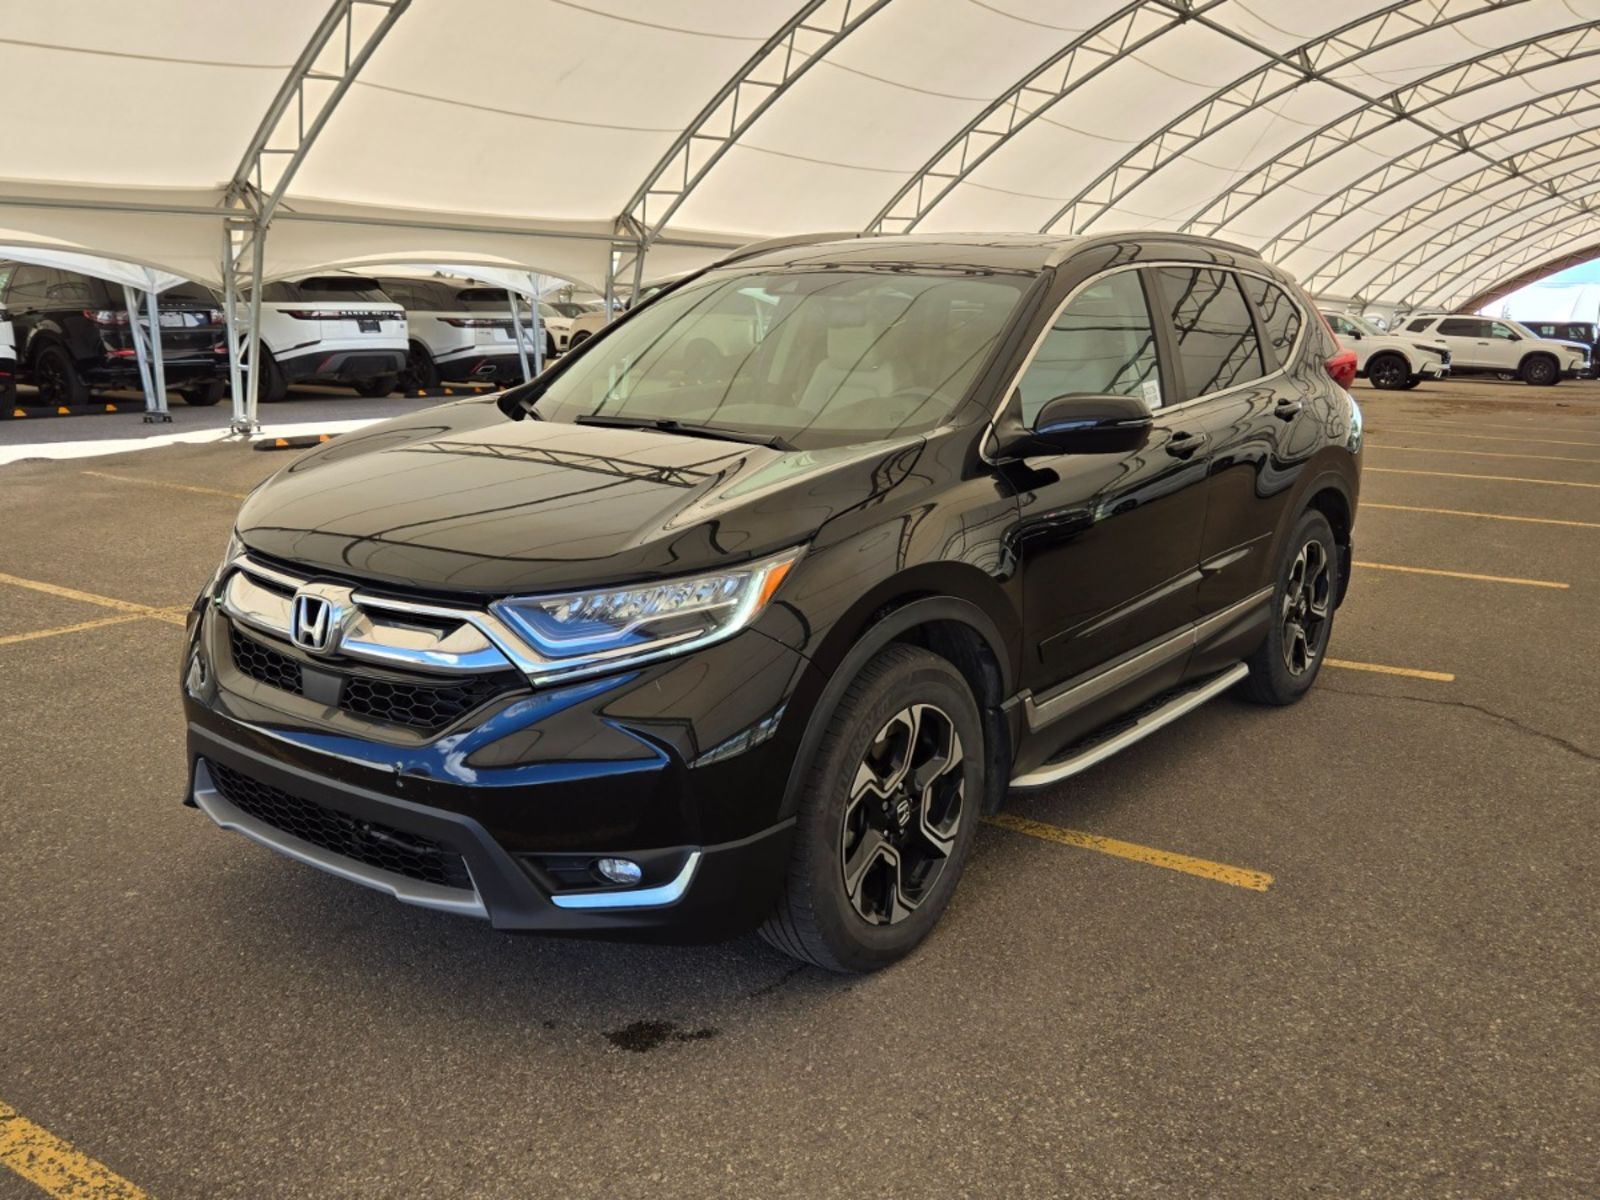 2017 Honda CR-V Touring - One Owner | No Accidents | Leather